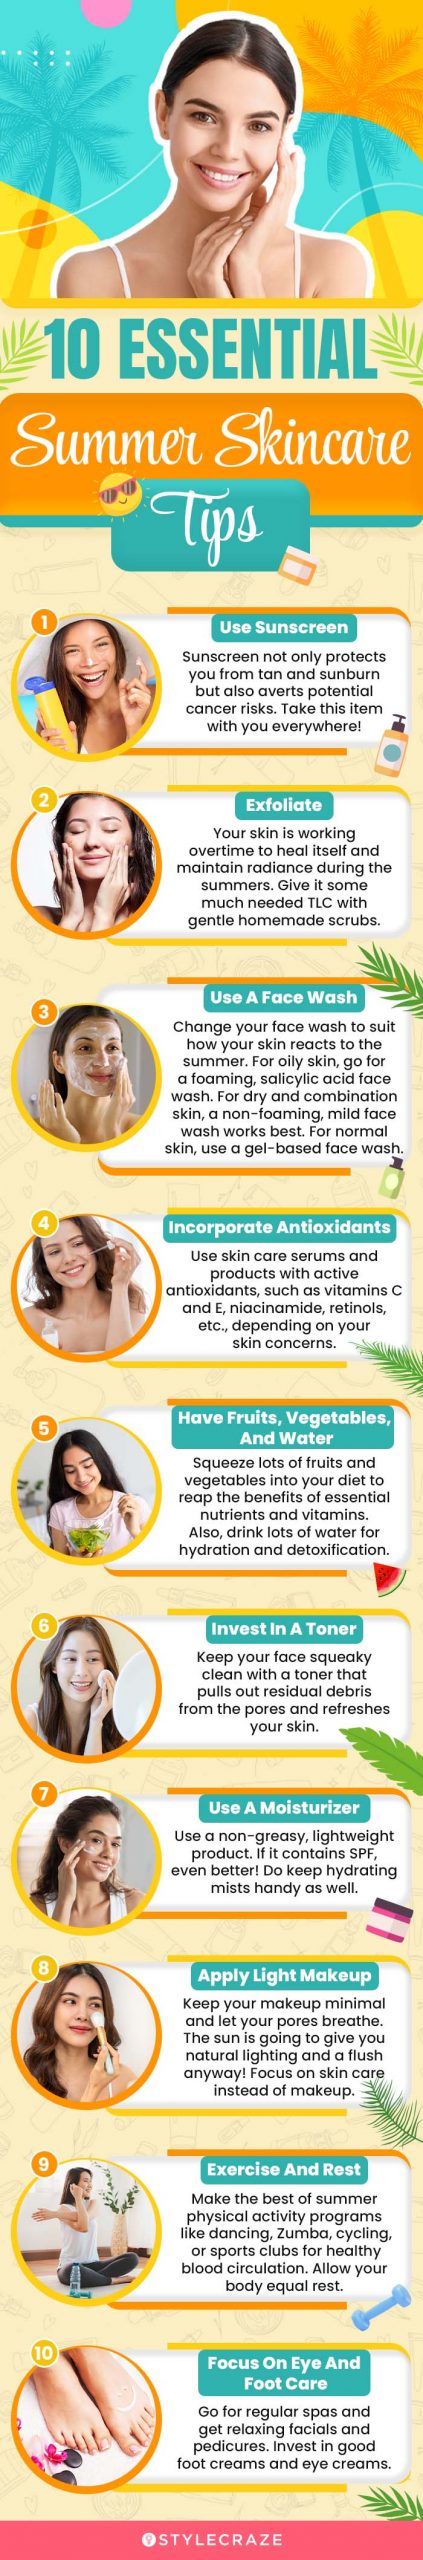 10 essential summer skincare tips[infographic]